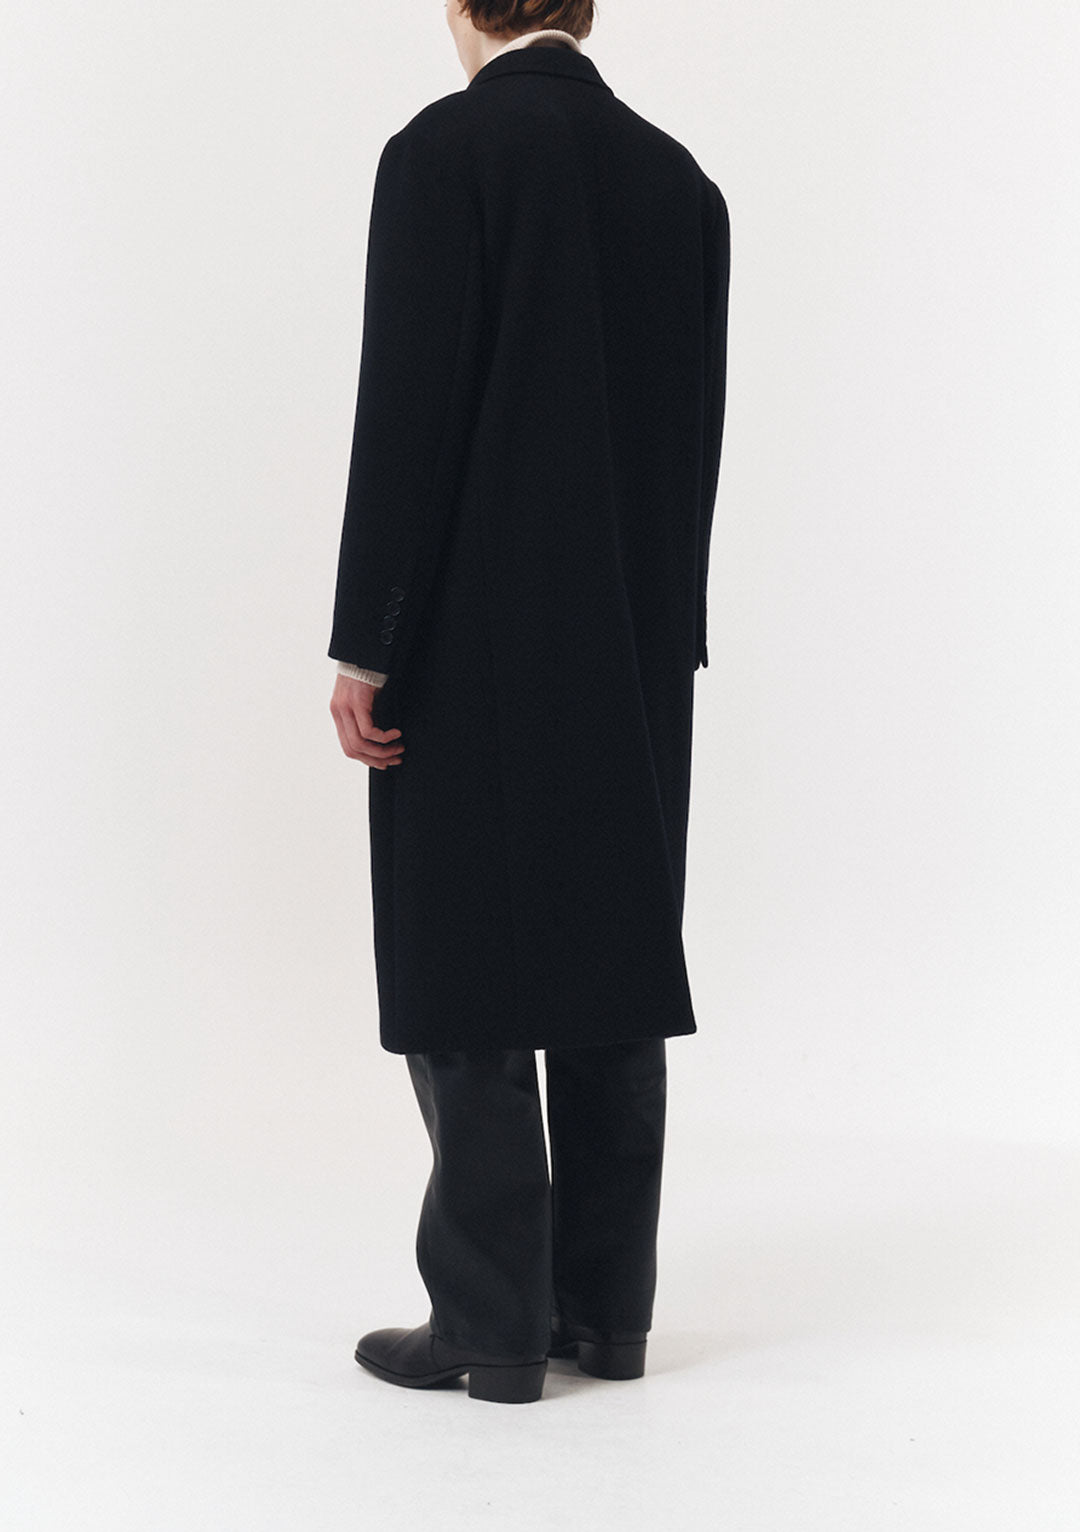 DUNST Unisex Tailored Double-Breasted Wool Coat